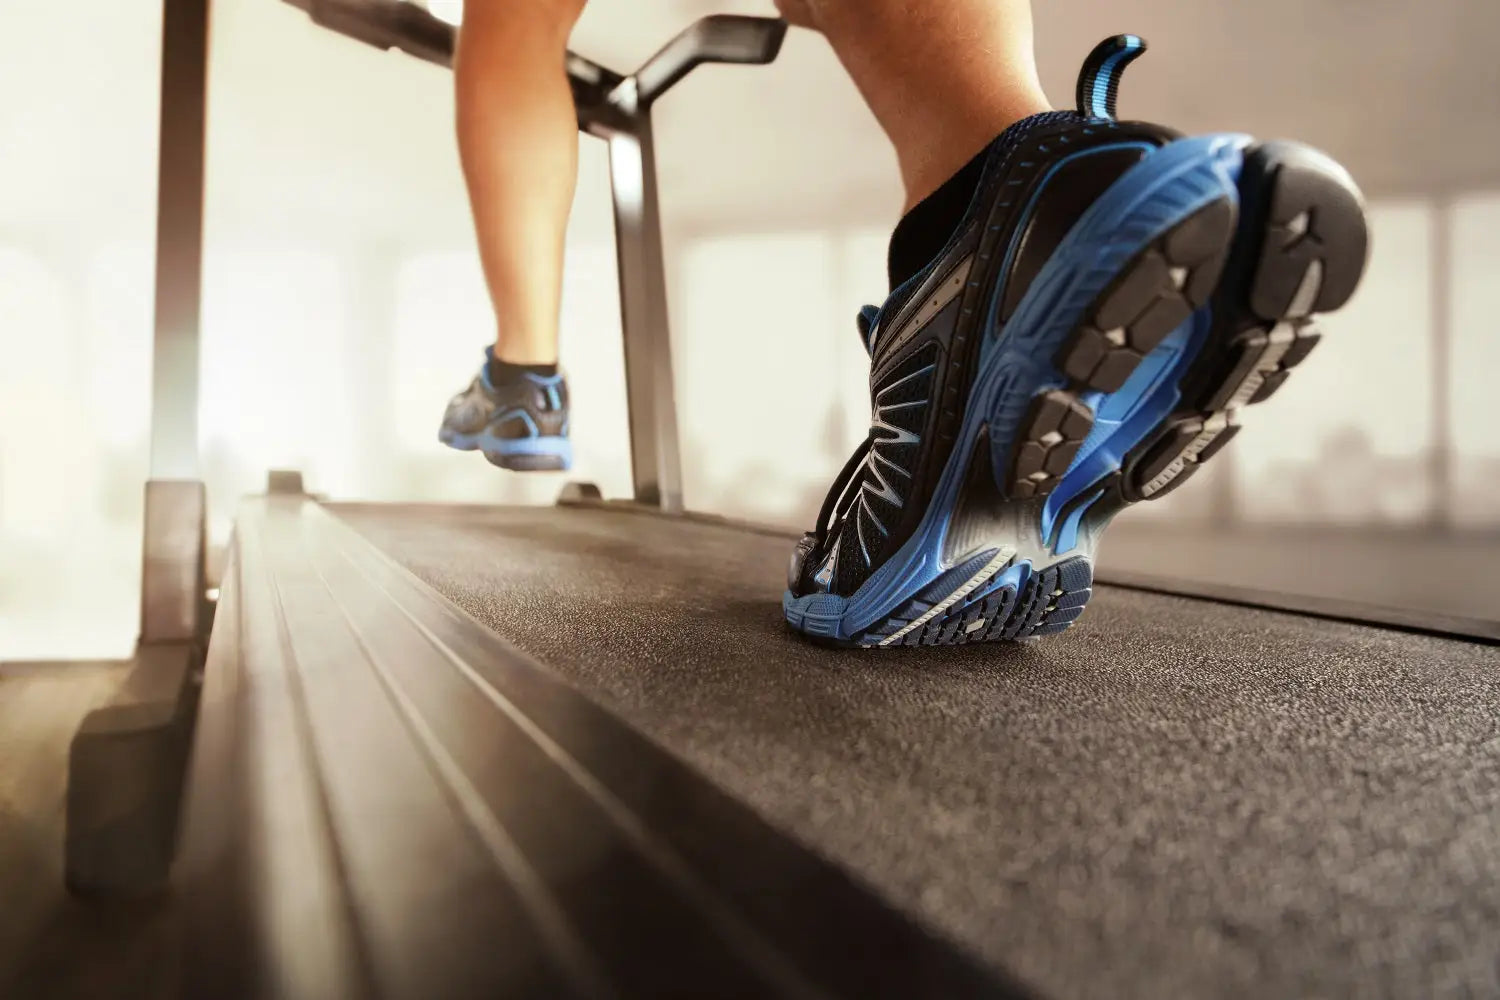 Upgrade Your Workout with Our Wide Selection of High-Quality Treadmills